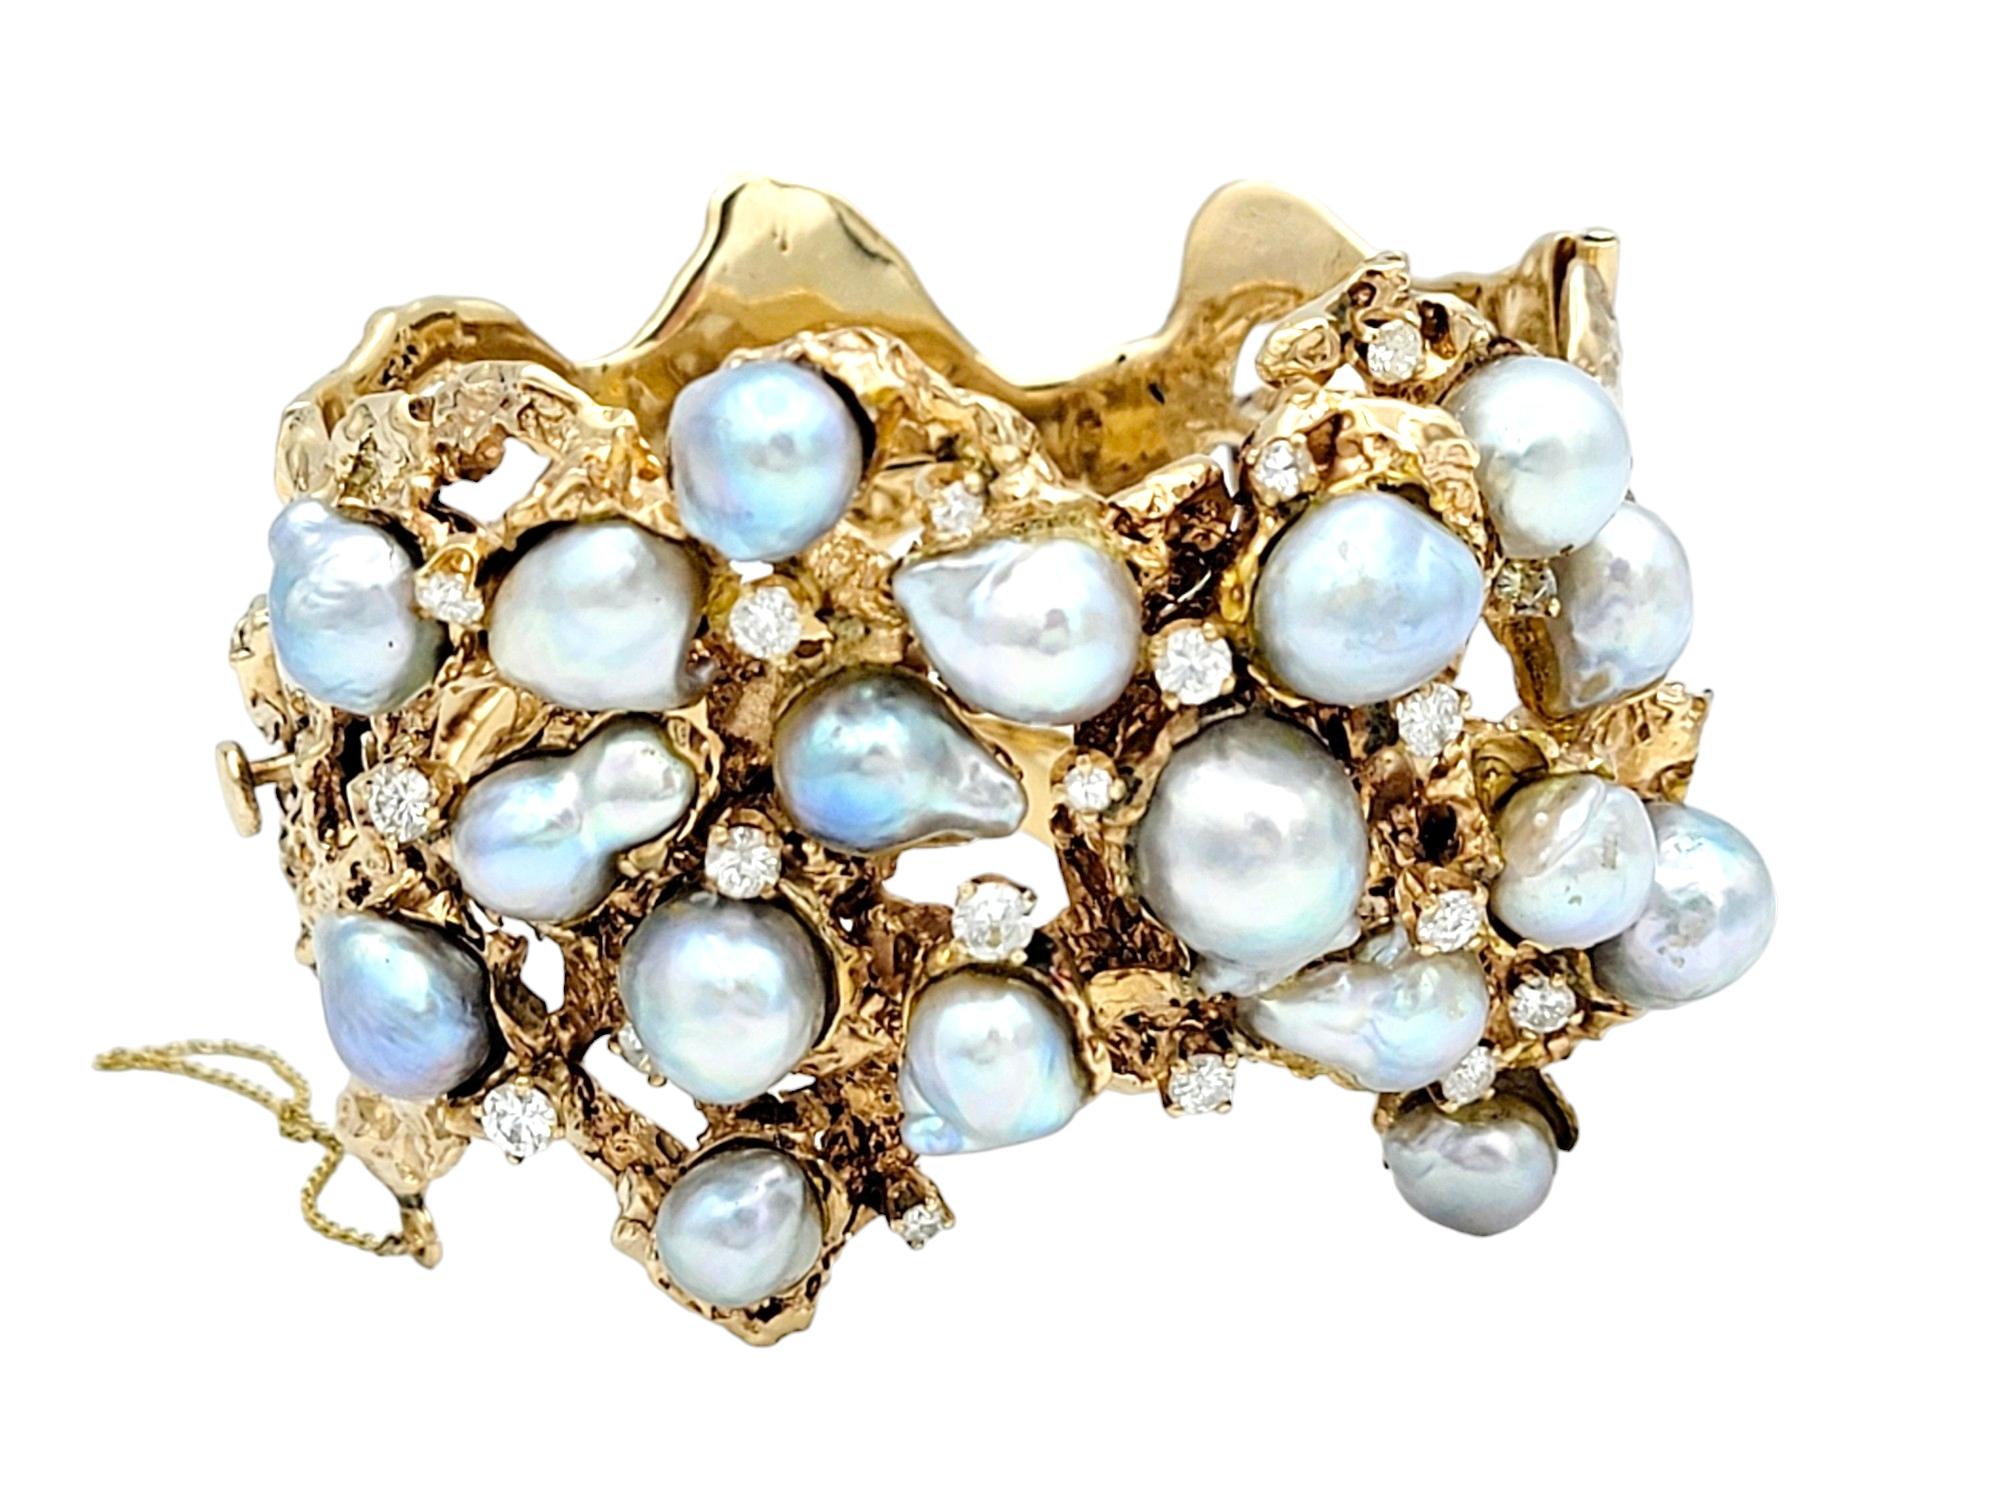 Elegance takes a sculptural form in this vintage Arthur King hinged bangle, a masterful creation in 14 karat yellow gold. The wide cuff features a series of lustrous cultured baroque pearls scattered in an asymmetrical dance across the expanse of